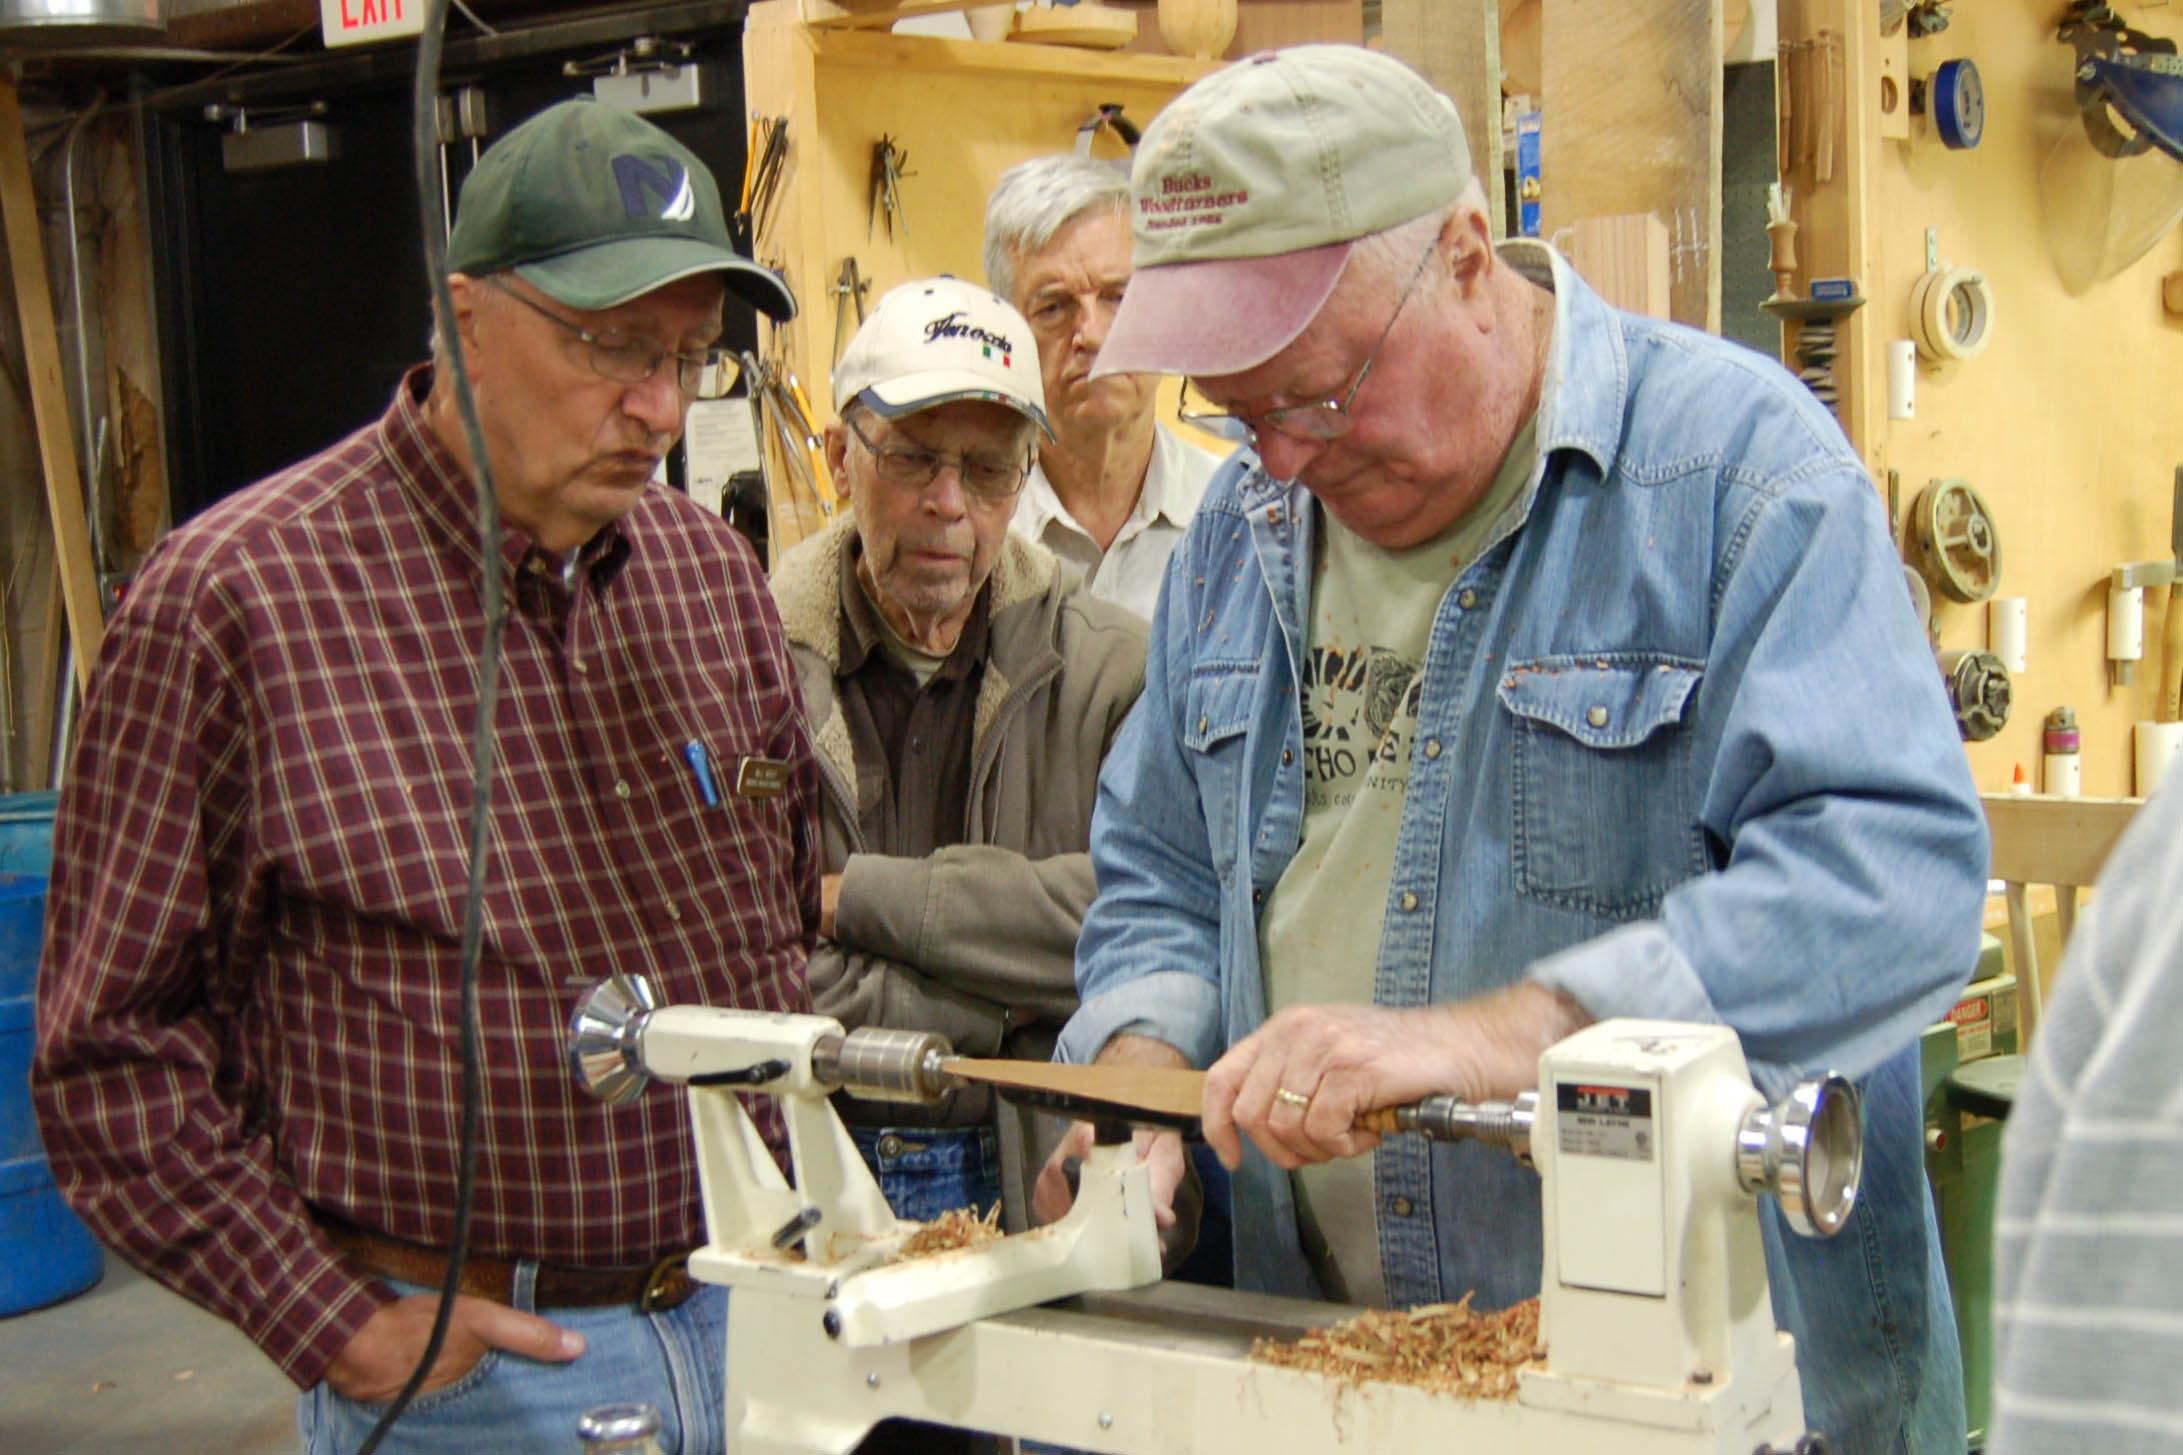  Bill Weist, Litton Frank, and Rick Baker look on as Ed works on a spatula. 